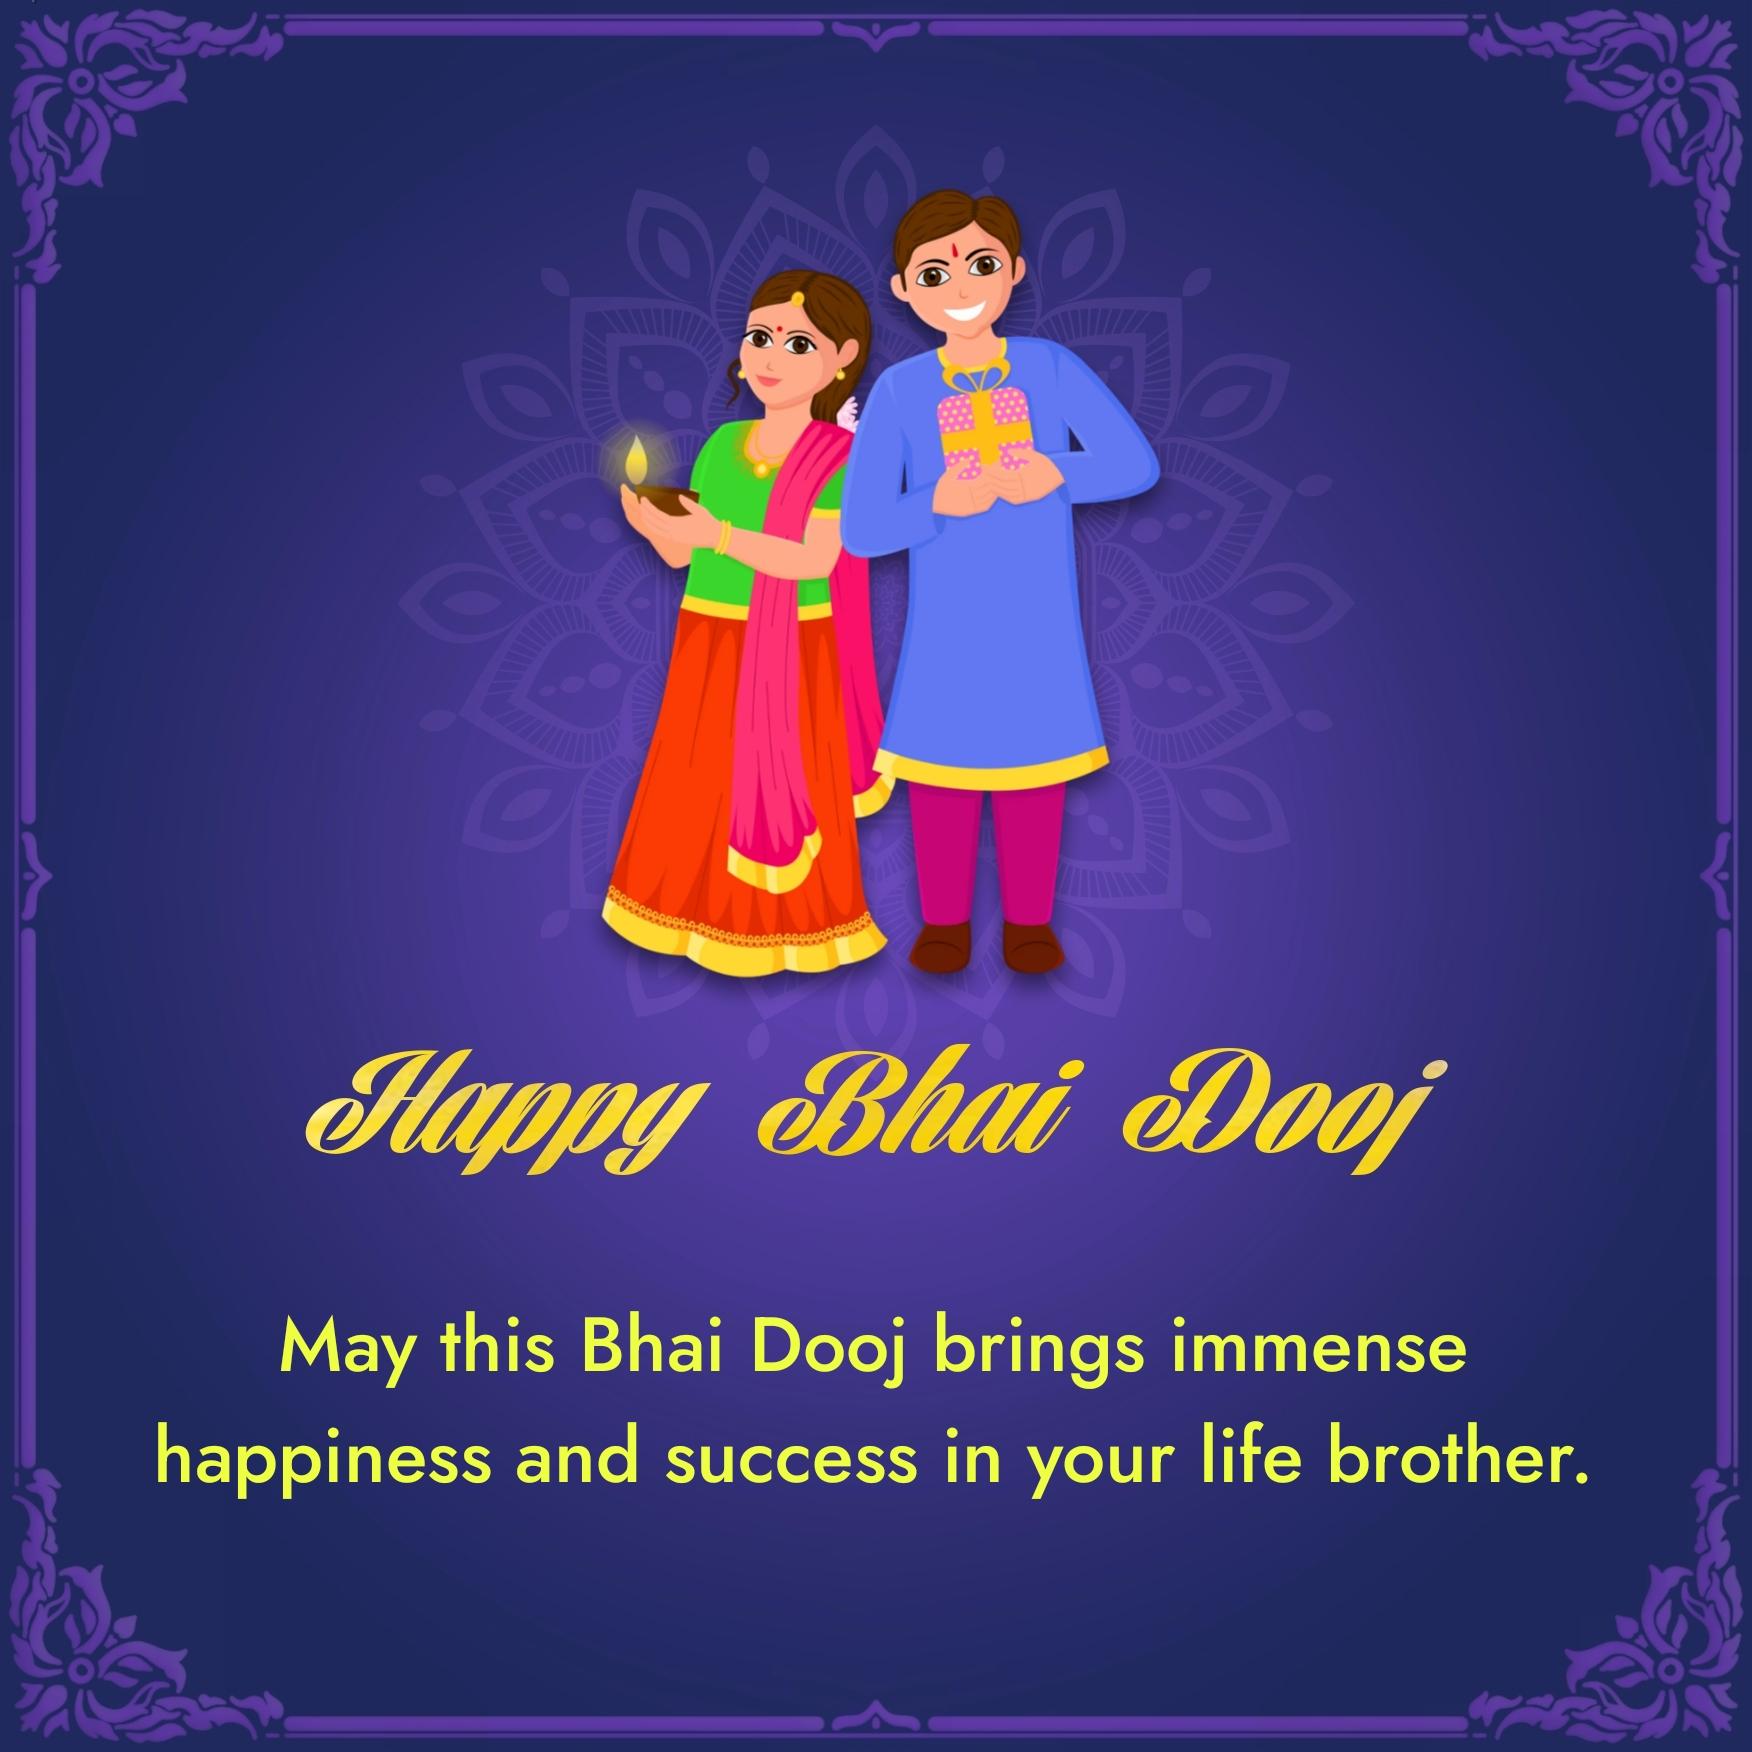 May this Bhai Dooj brings immense happiness and success